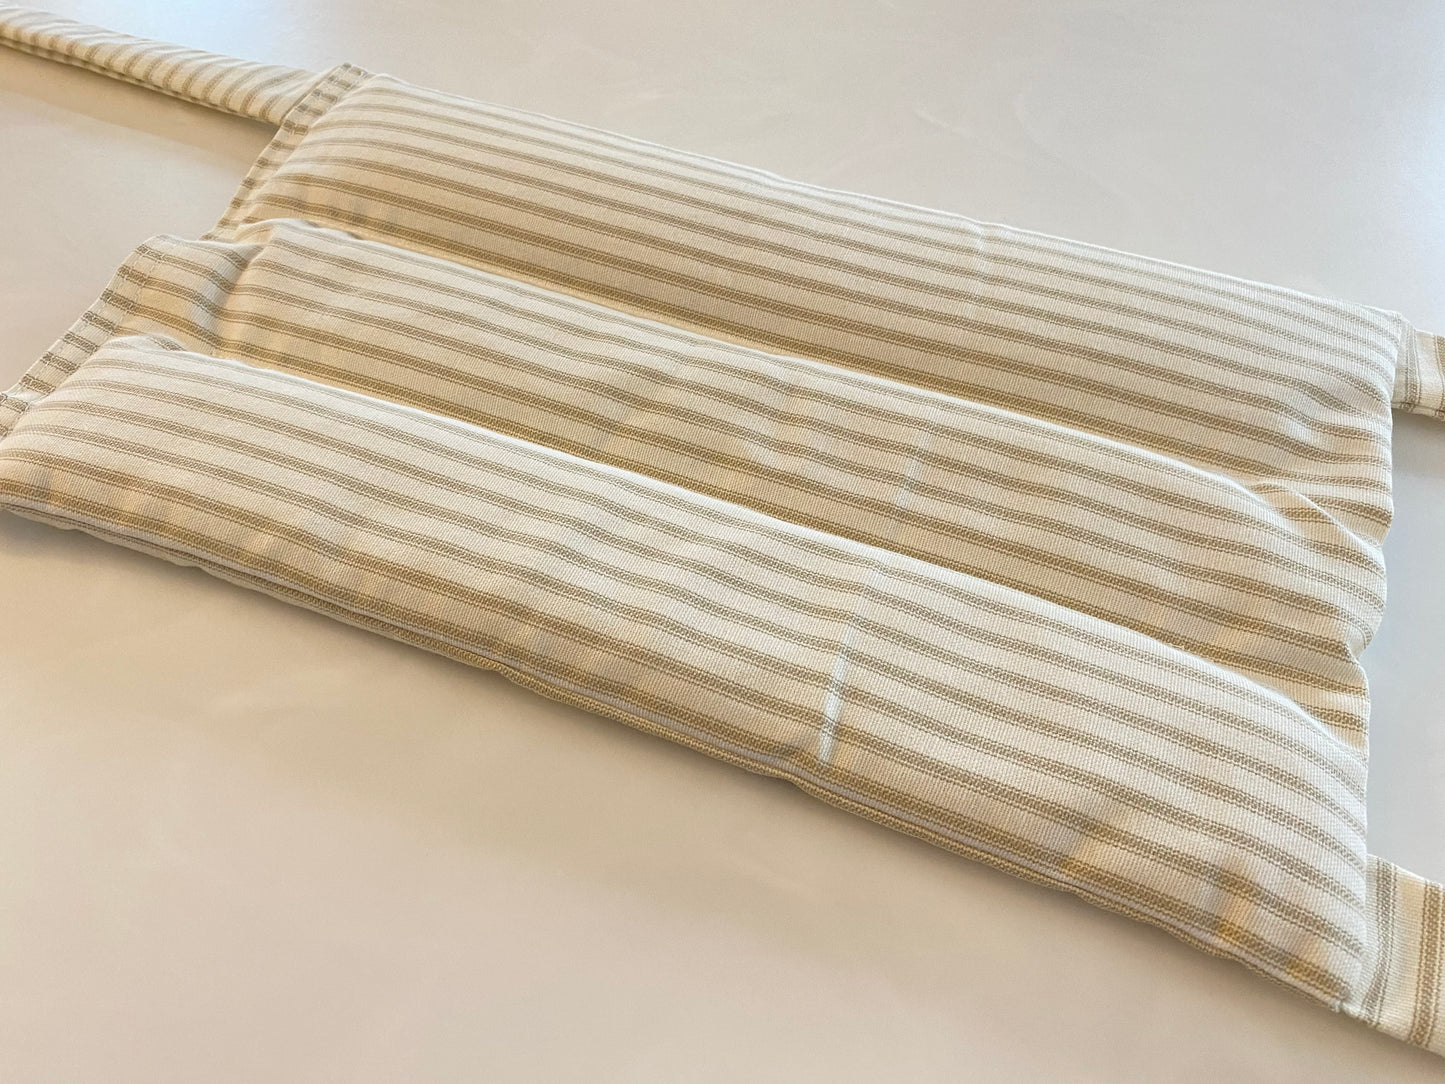 Khaki Stripe Large Microwavable Rice Bag with Ties for Hands Free Use